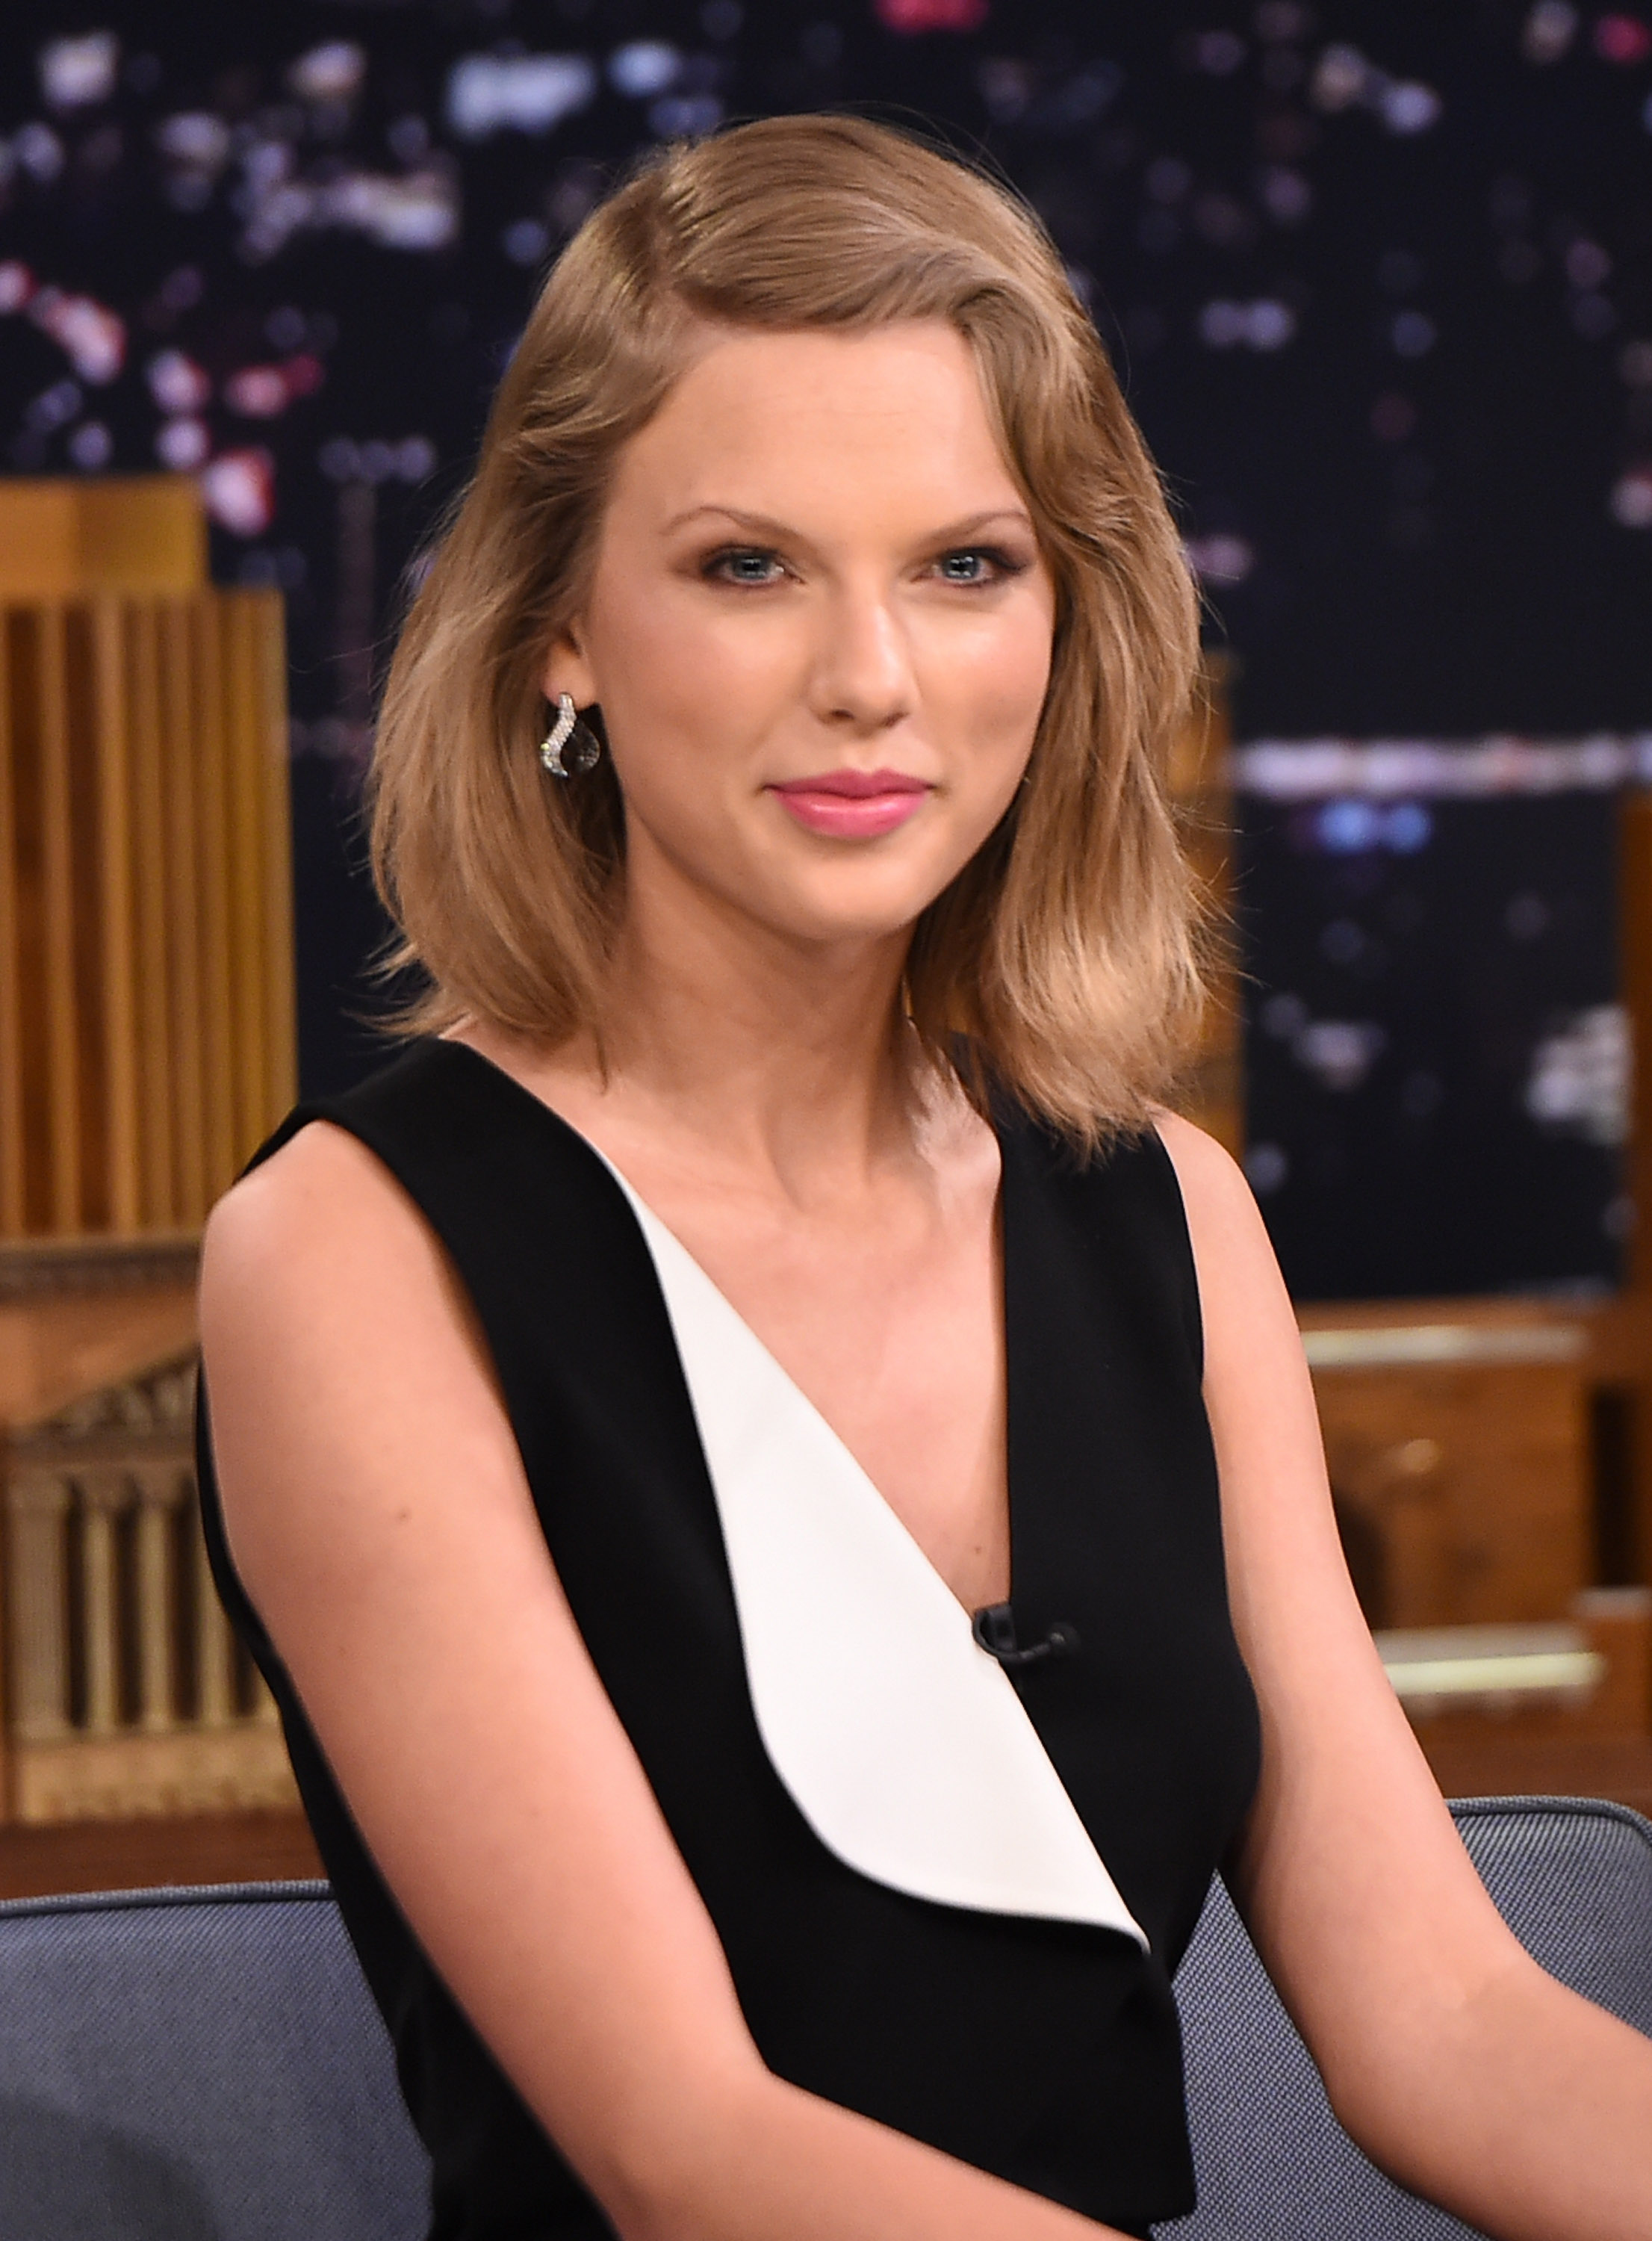 Taylor Swift visits "The Tonight Show Starring Jimmy Fallon" in New York City on Feb. 17, 2015.